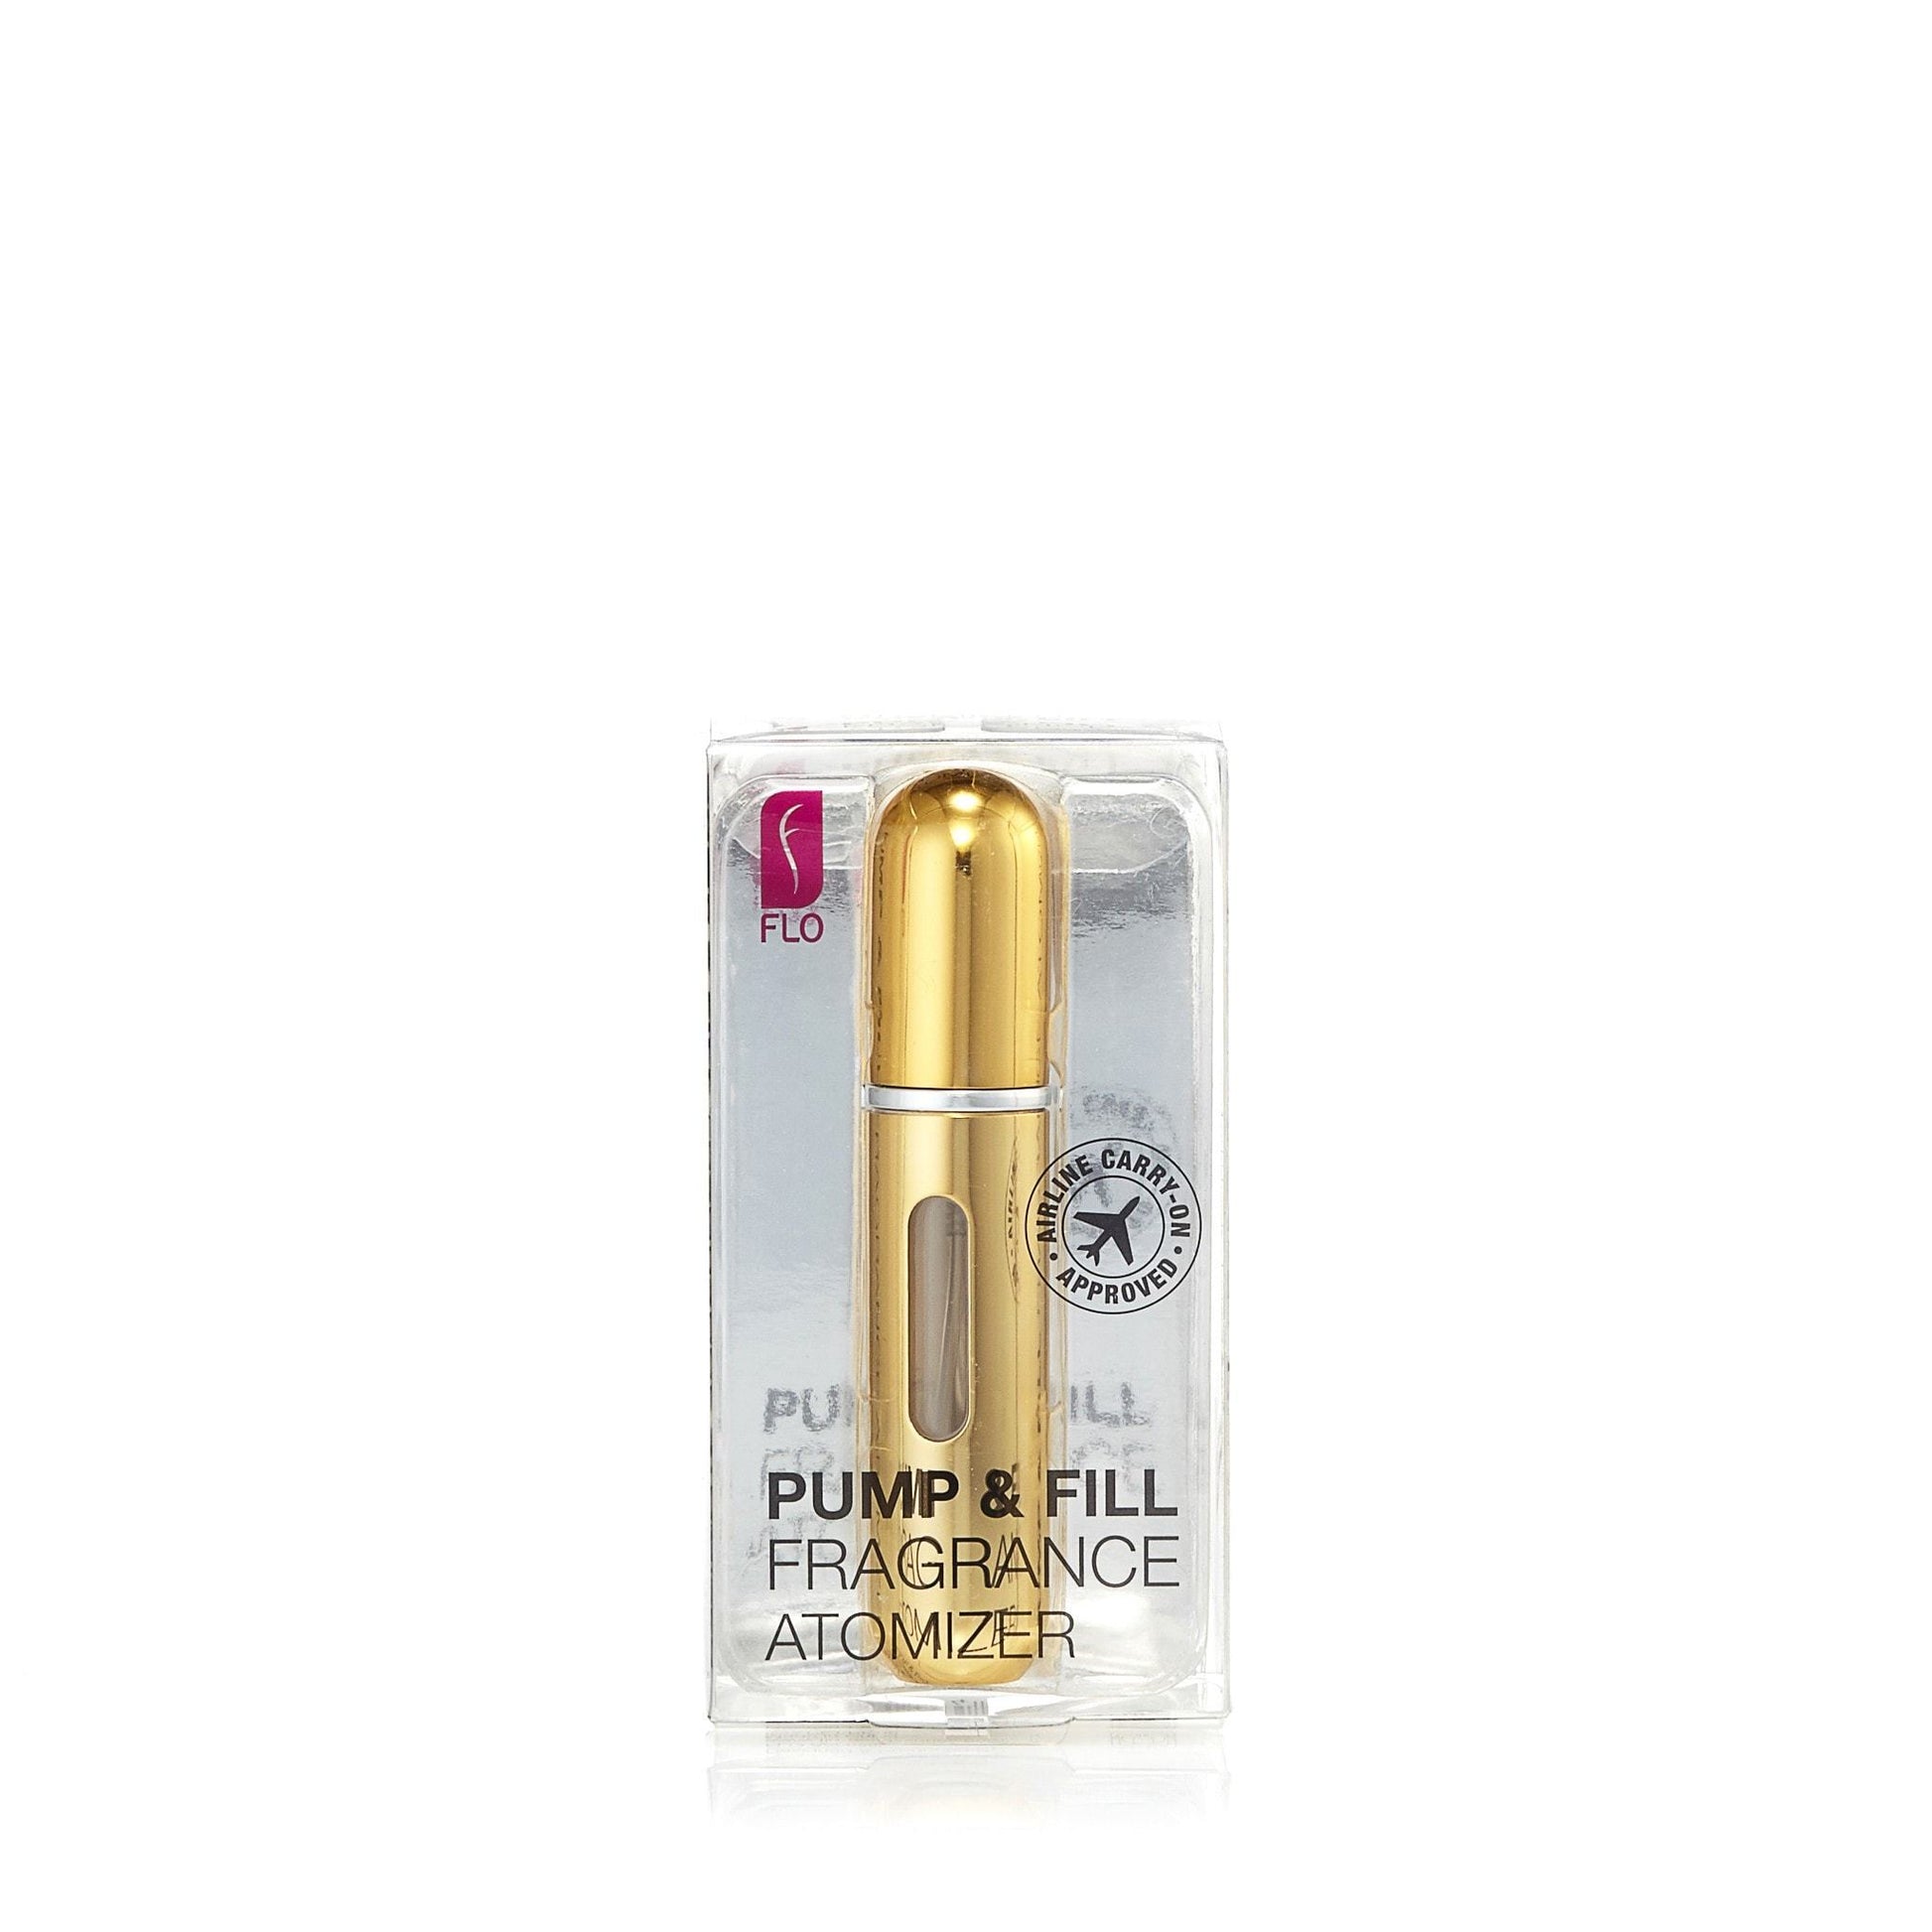 Pump and Fill Fragrance Atomizer by Flo, Product image 3